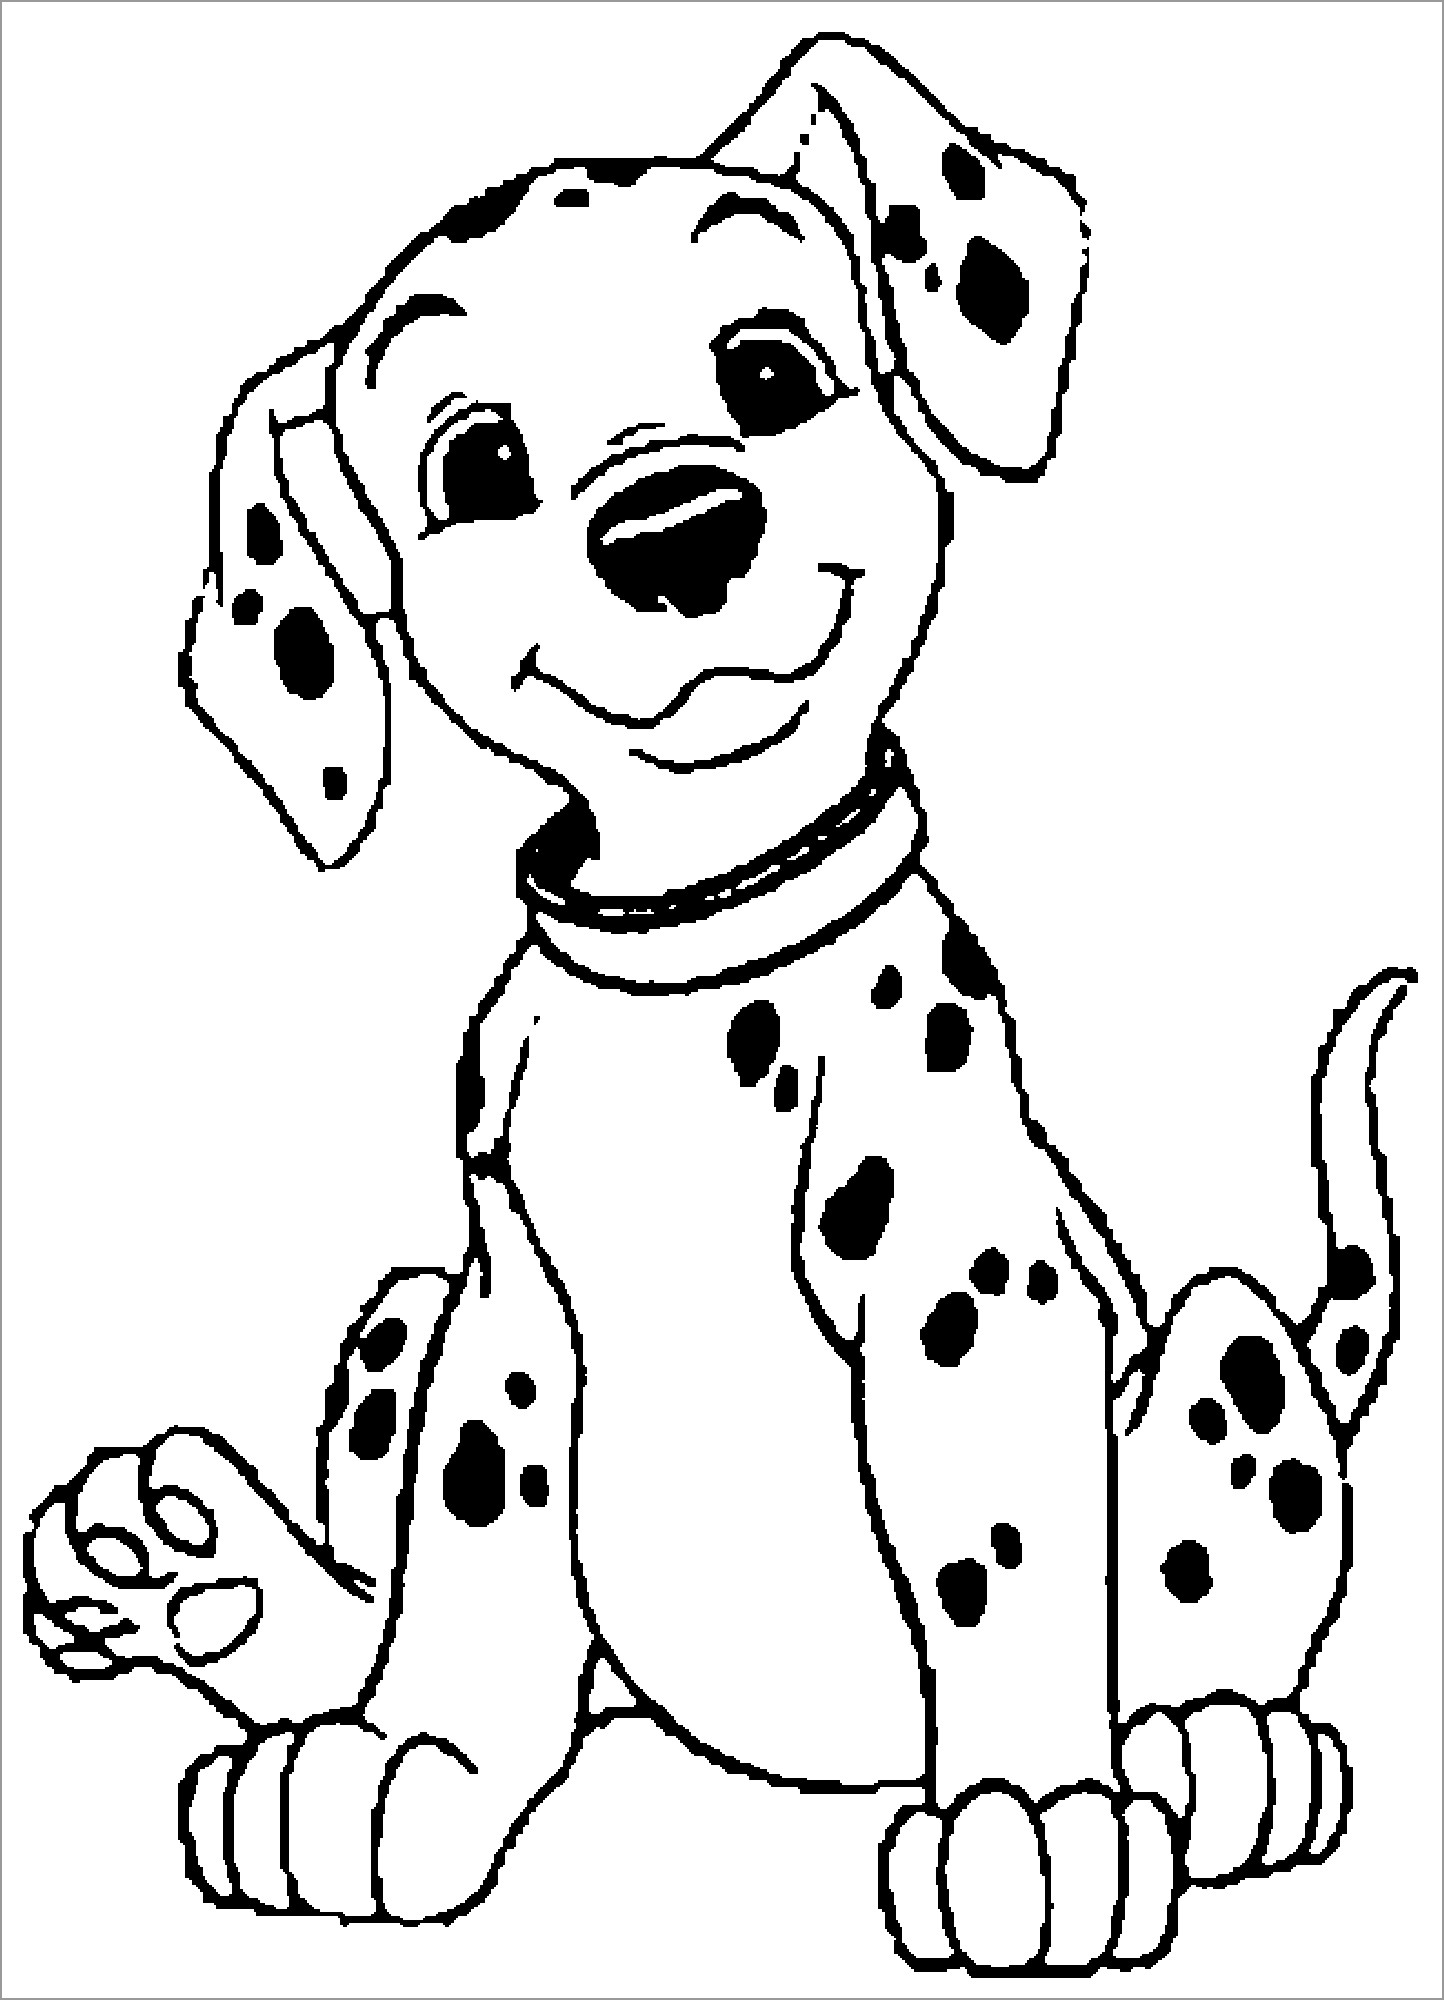 101 Dalmatians Coloring Page for Kids